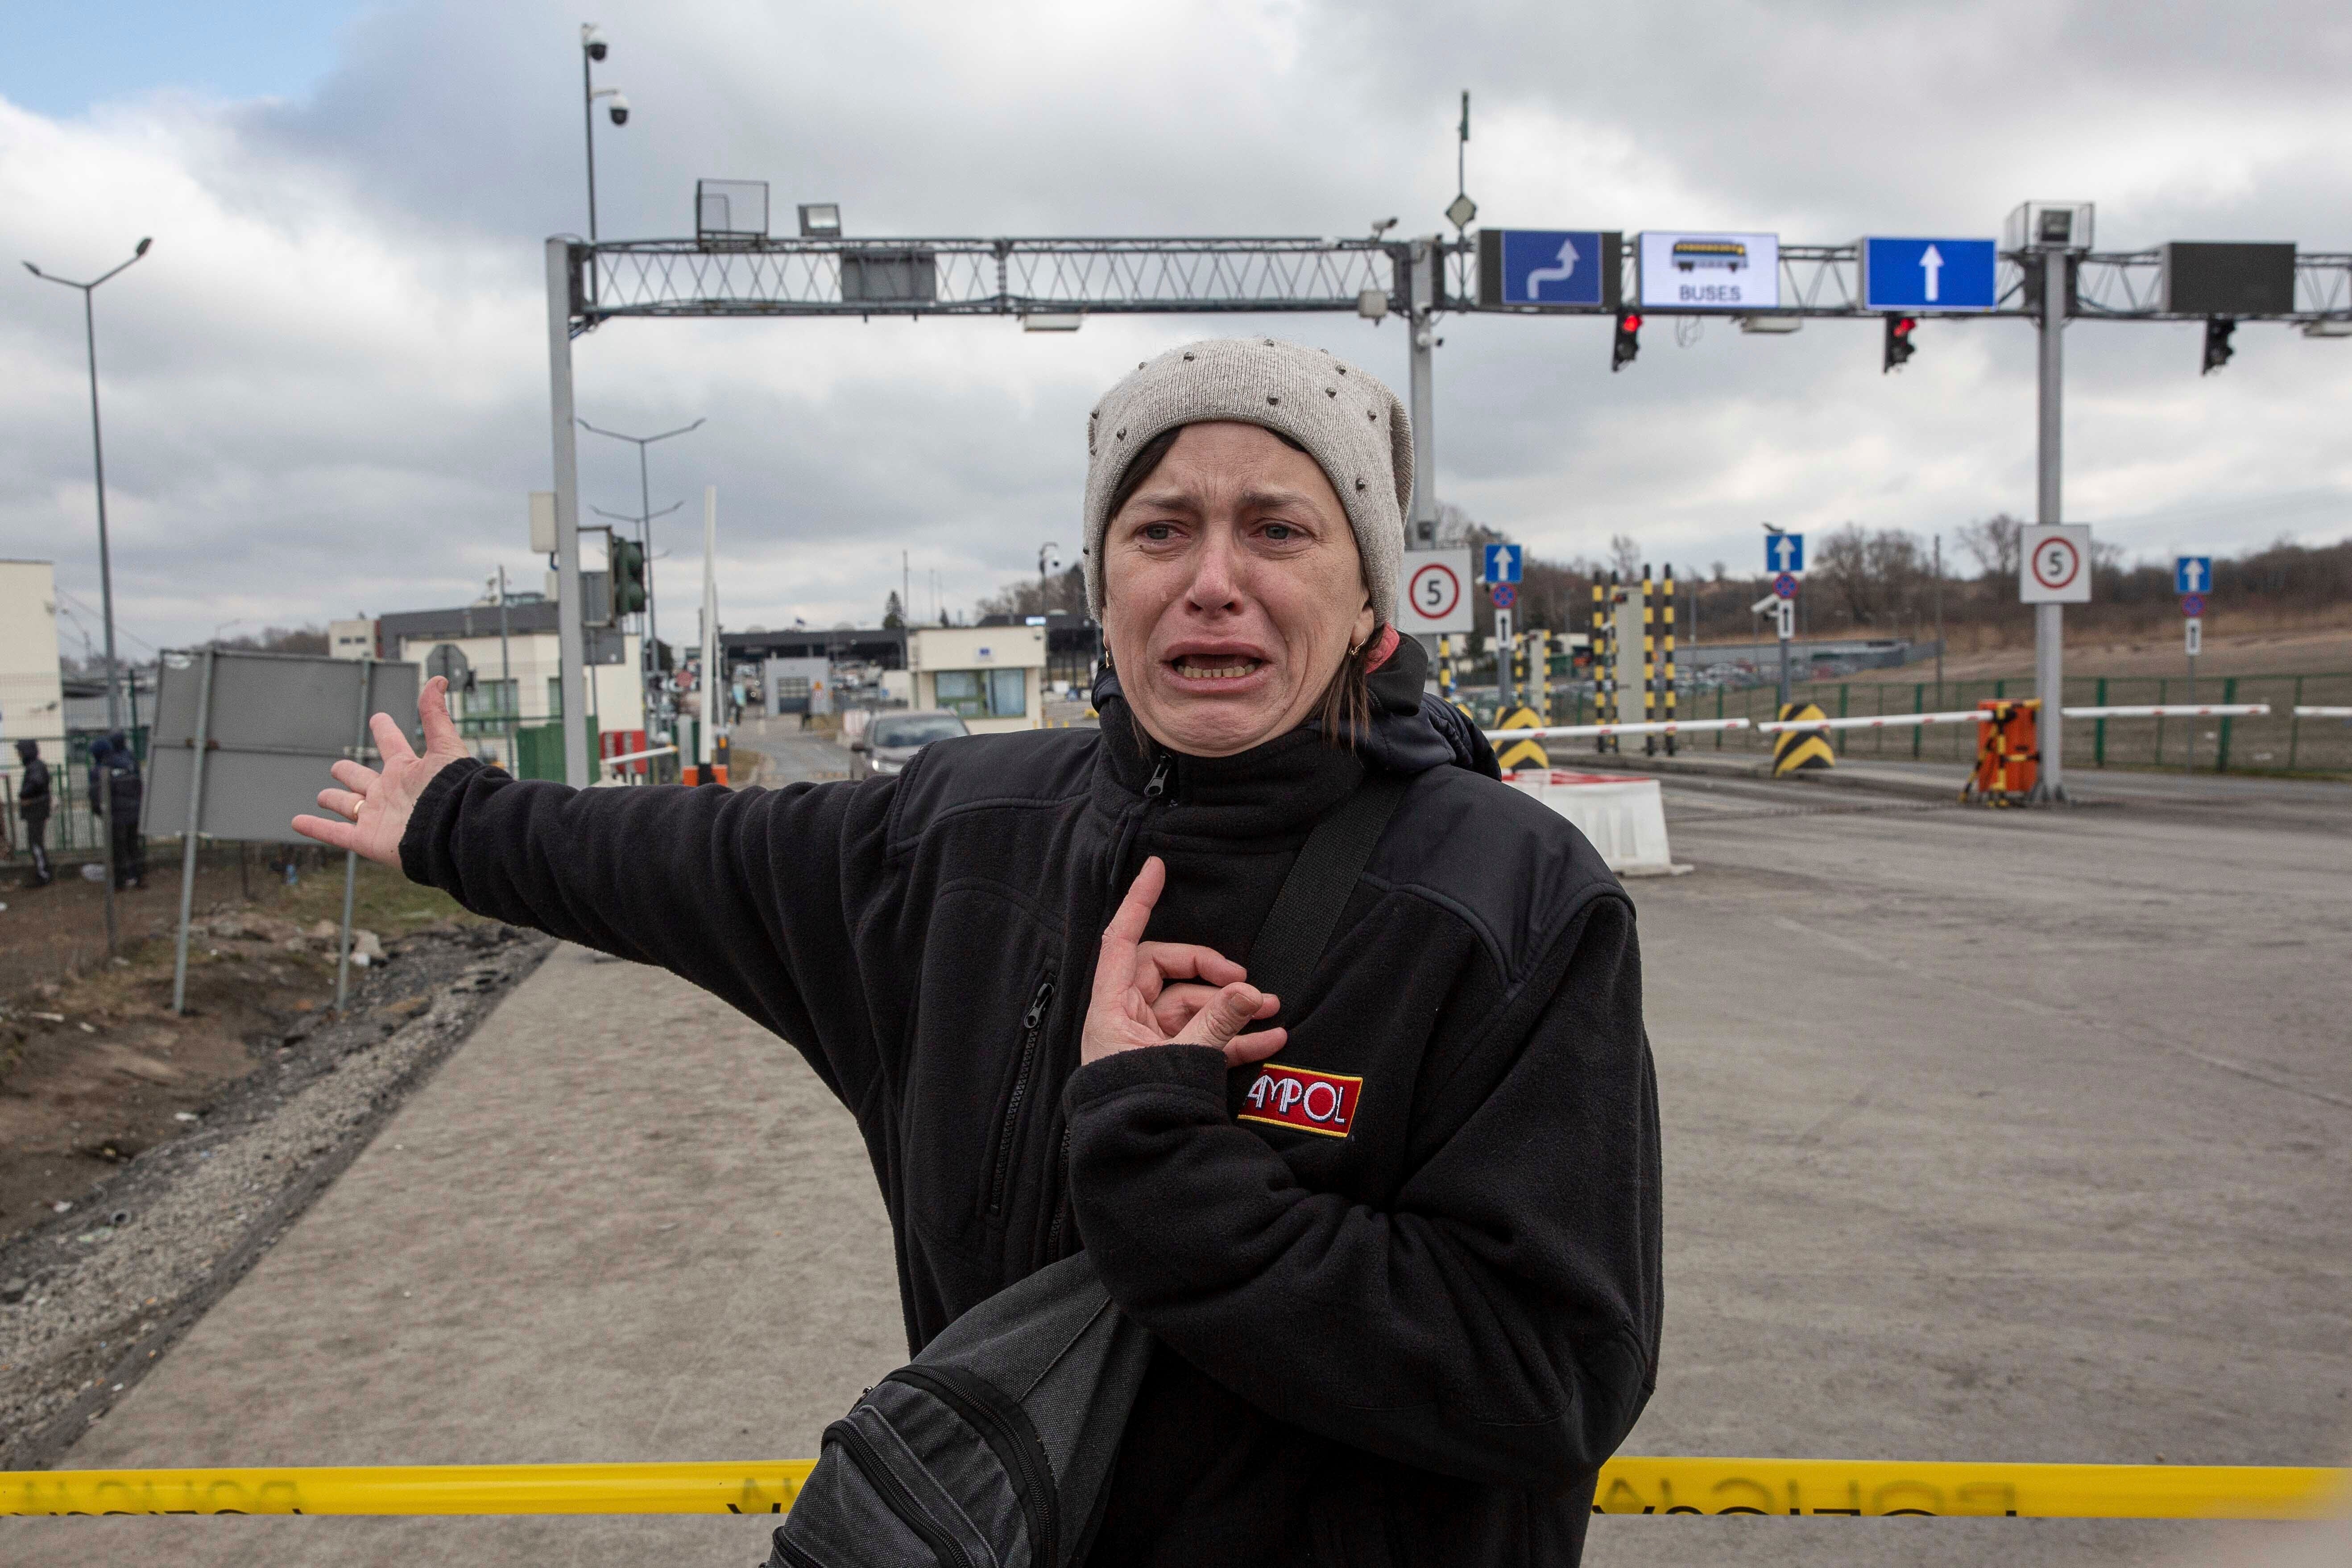 Ukranian Hanna Pavlovna Lukasz’s 12 and 8-year-old sons and her 66-year-old mother have been waiting on the Ukrainian side of the border for four days to cross at the Medyka border crossing in Poland